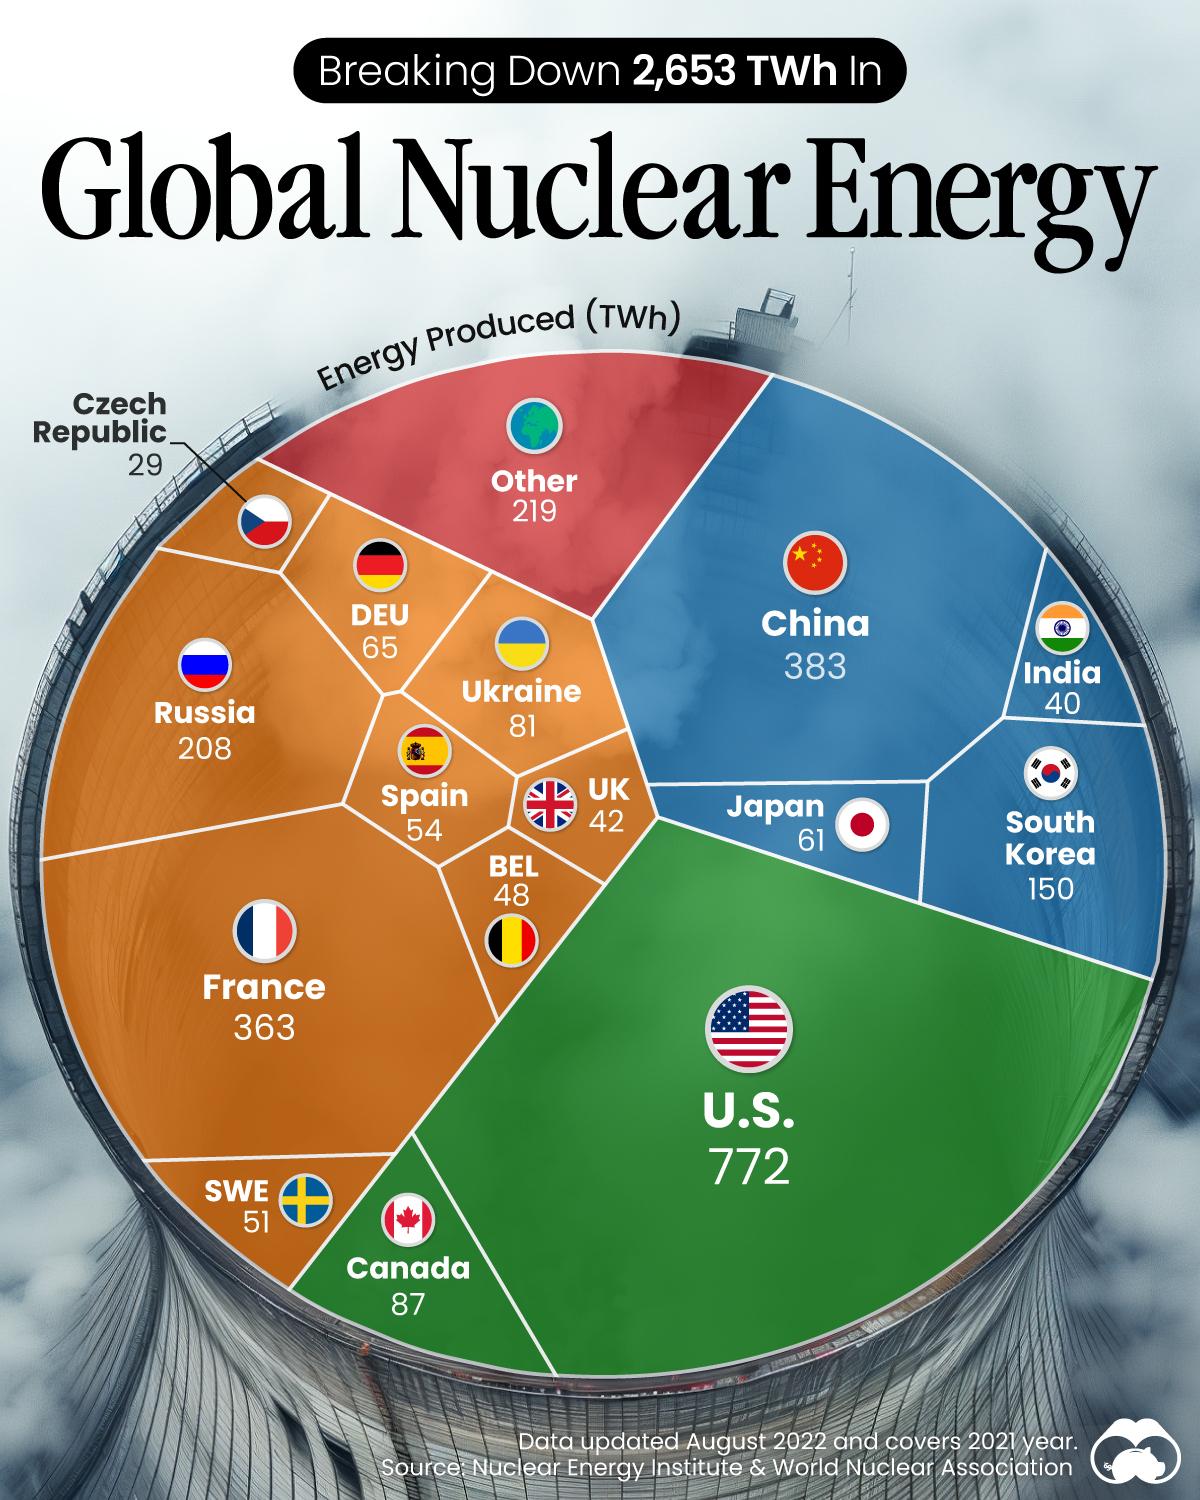 America Leads Global Nuclear Energy Production ☢️